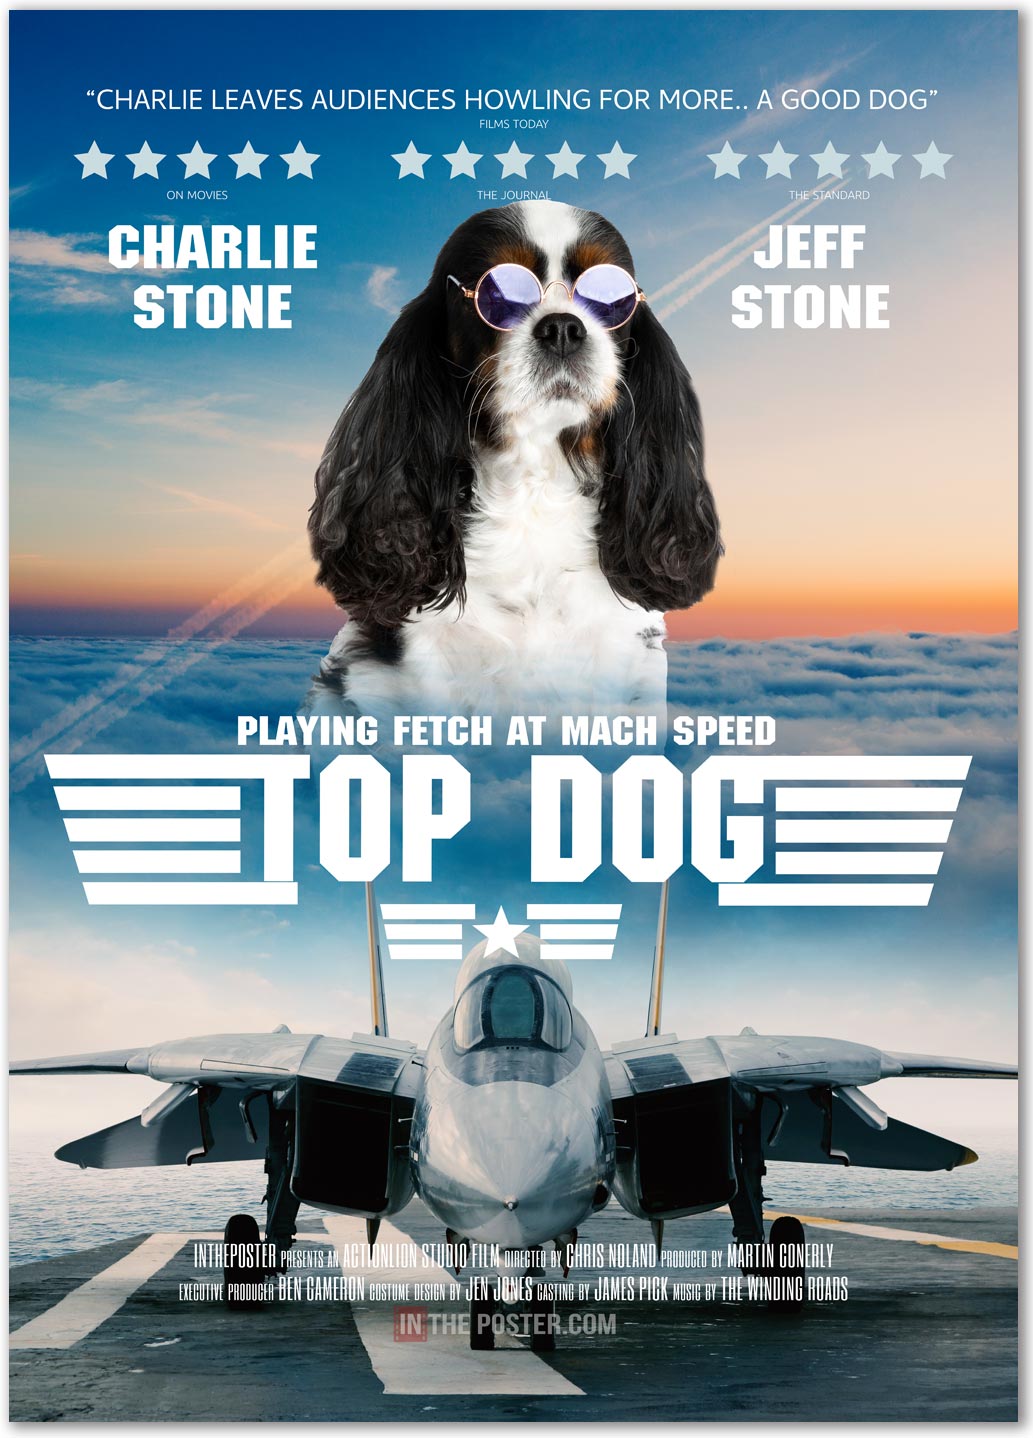 A dog wears sunglasses in this custom dog film movie poster called top dog, with a fighter jet below, against a blue sky at sunrise.